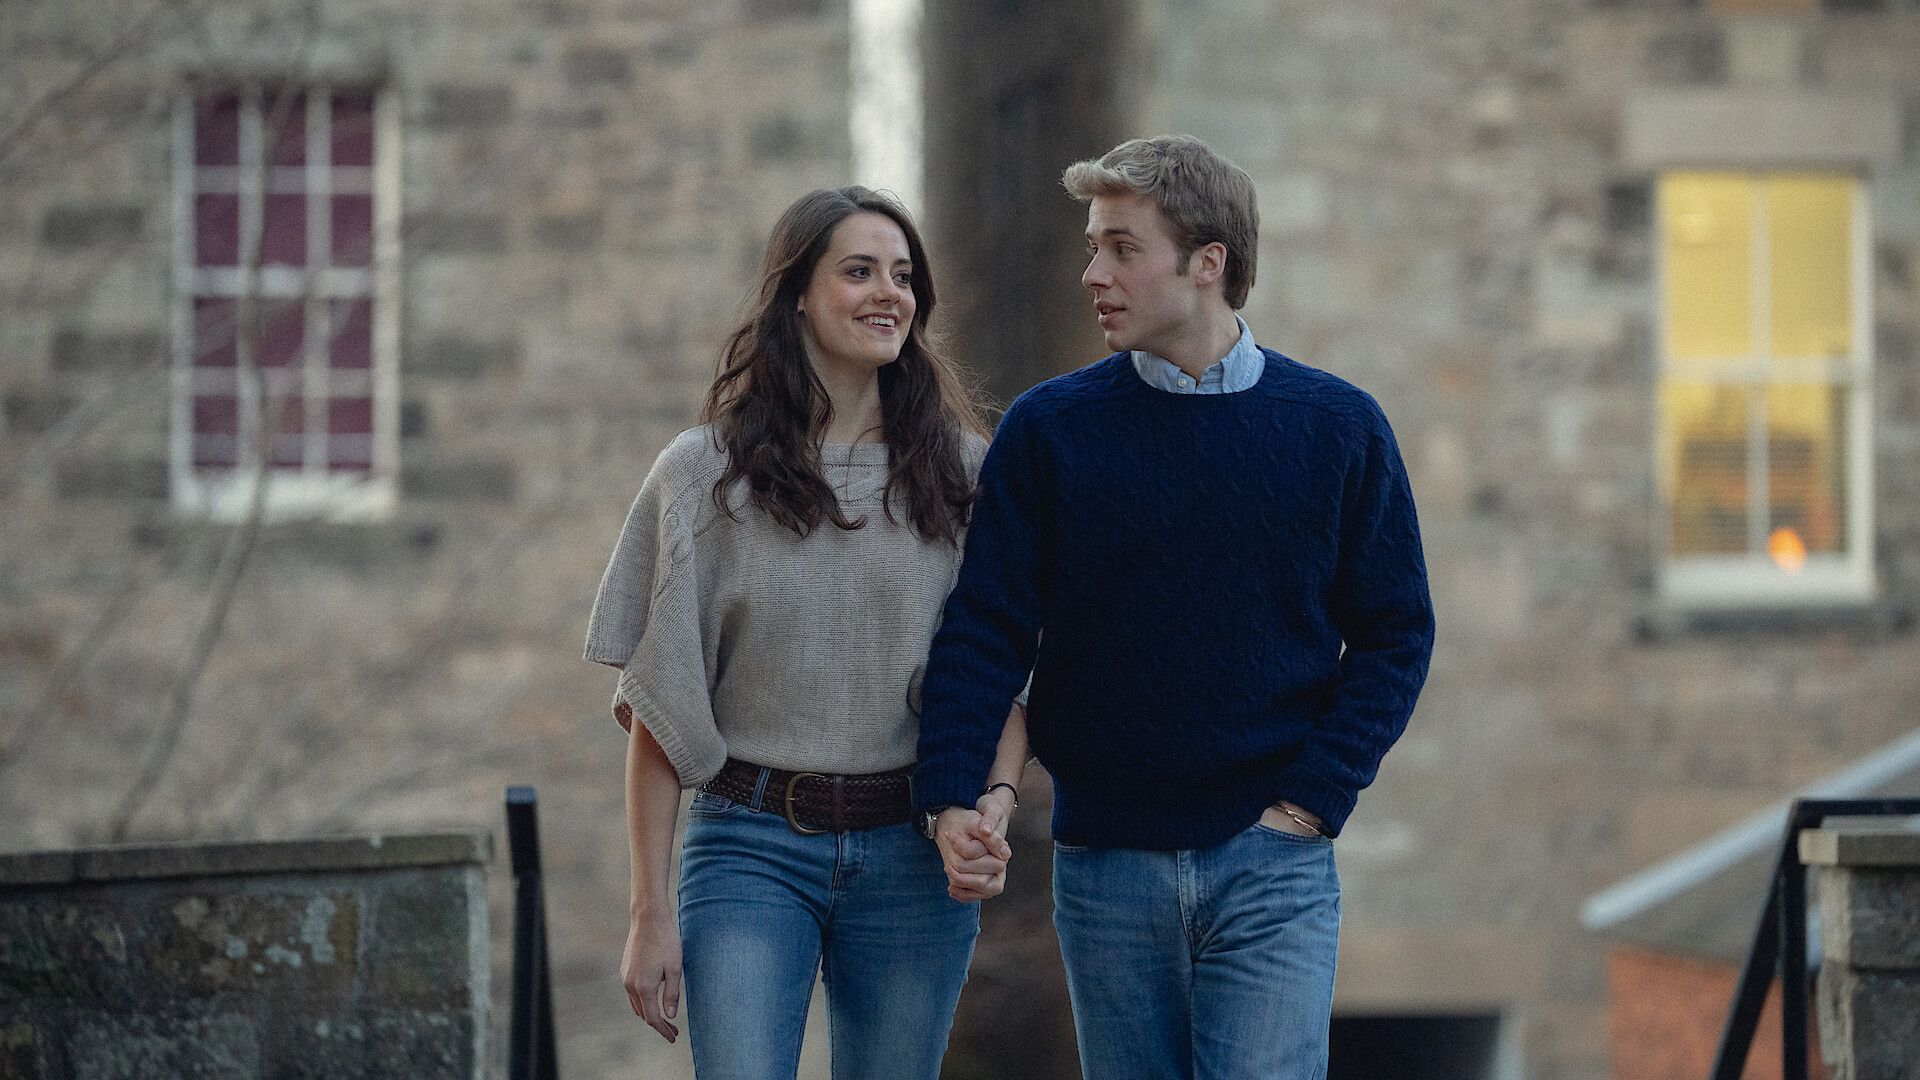 The Crown Season 6 presents your first look at Will and Kate